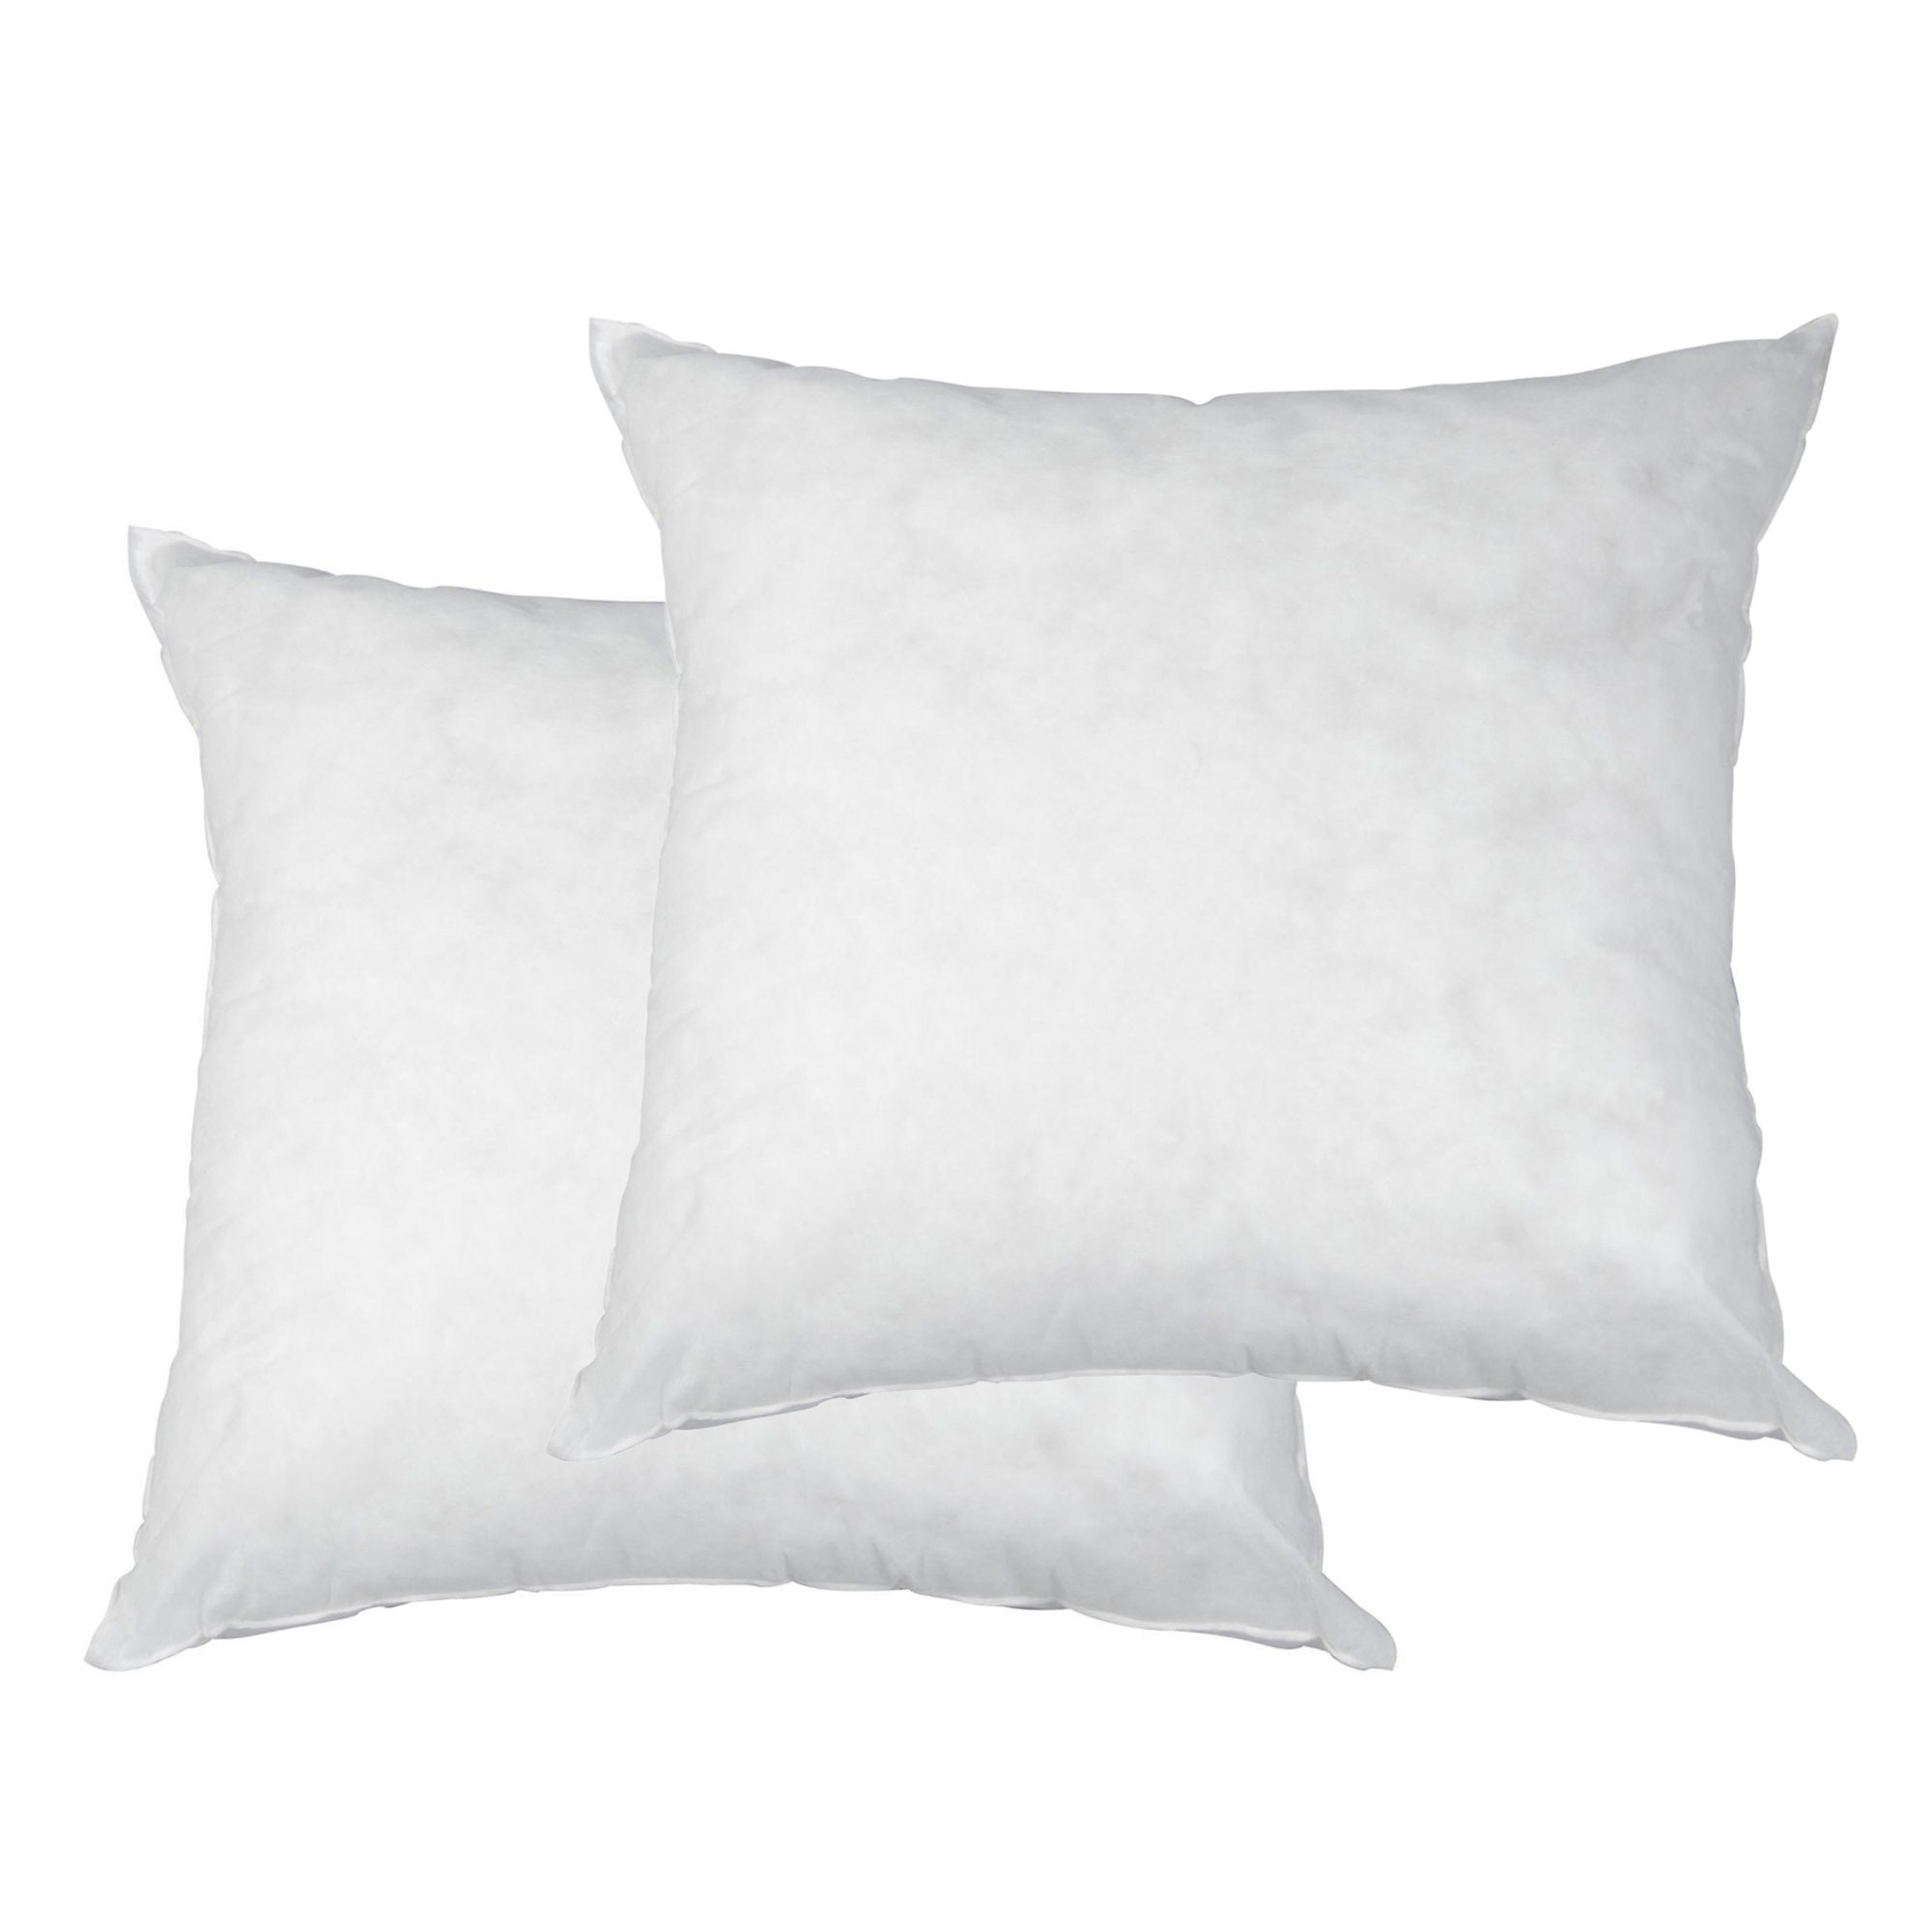 95% Feather 5% Down - Round Decorative Pillow Insert - MADE IN USA –  ComfyDown